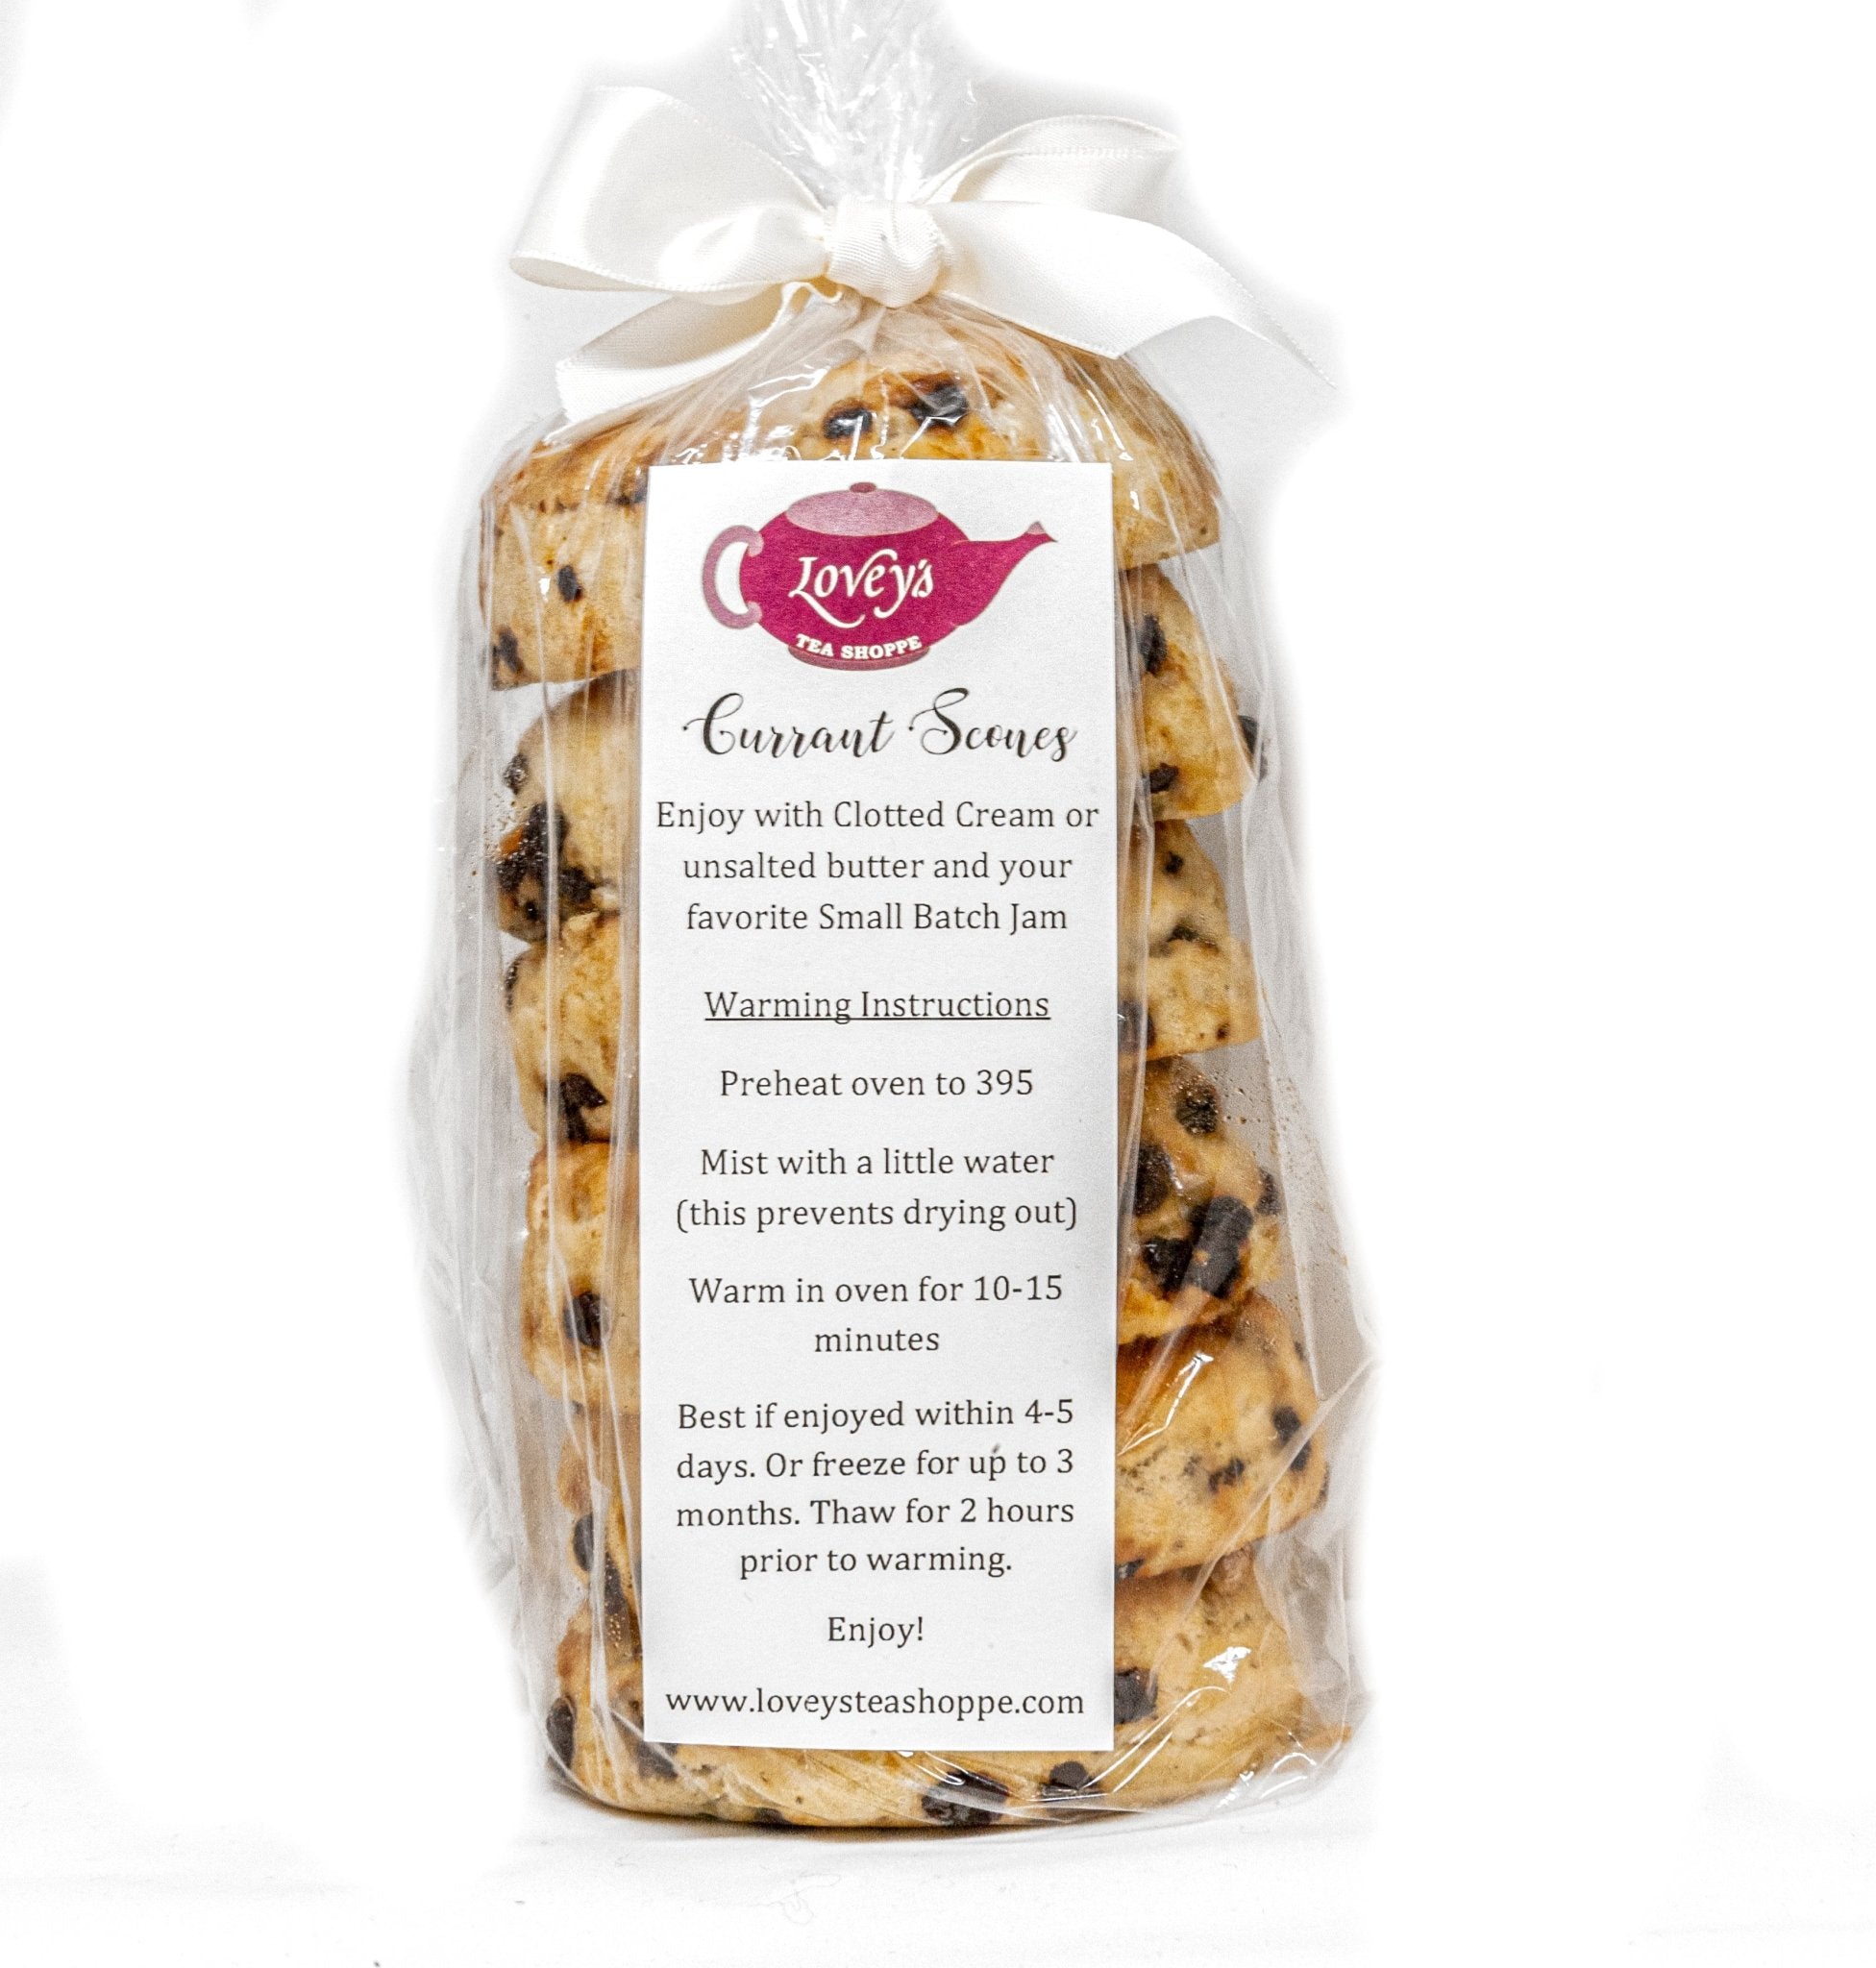 Lovey's Tea Shoppe Traditional Black Currant Scones - 6 Pack - Small Batch Jam Co